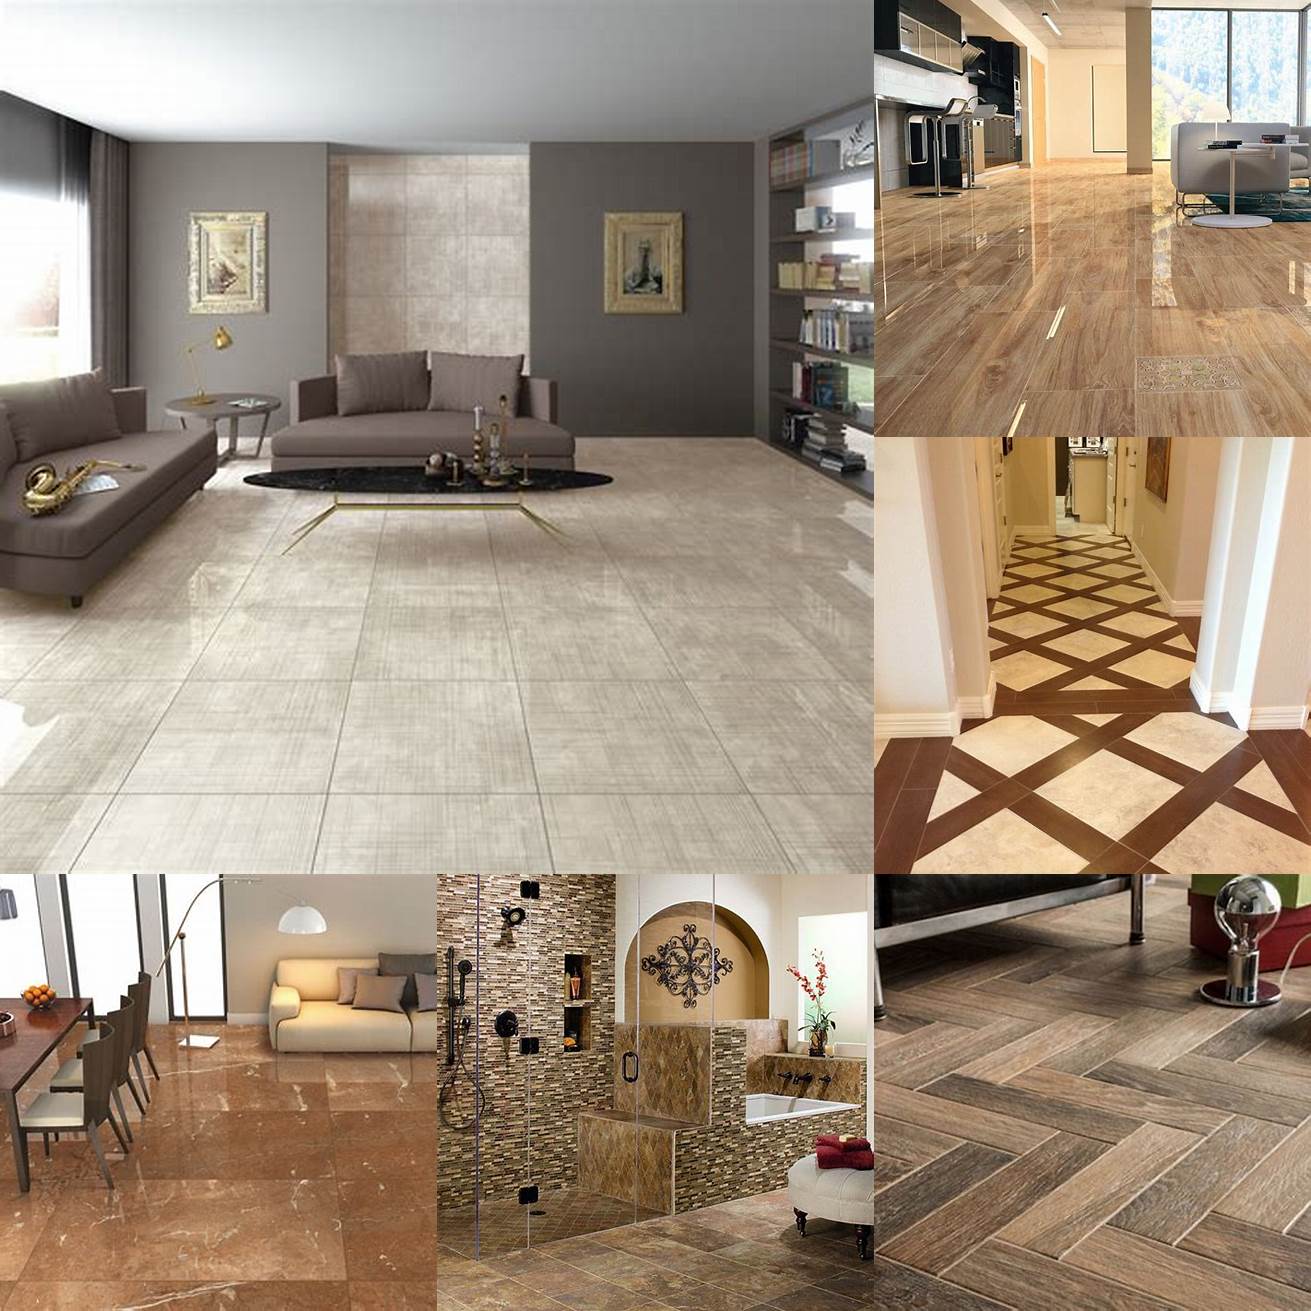 Ceramic floor tiles come in various designs and colors